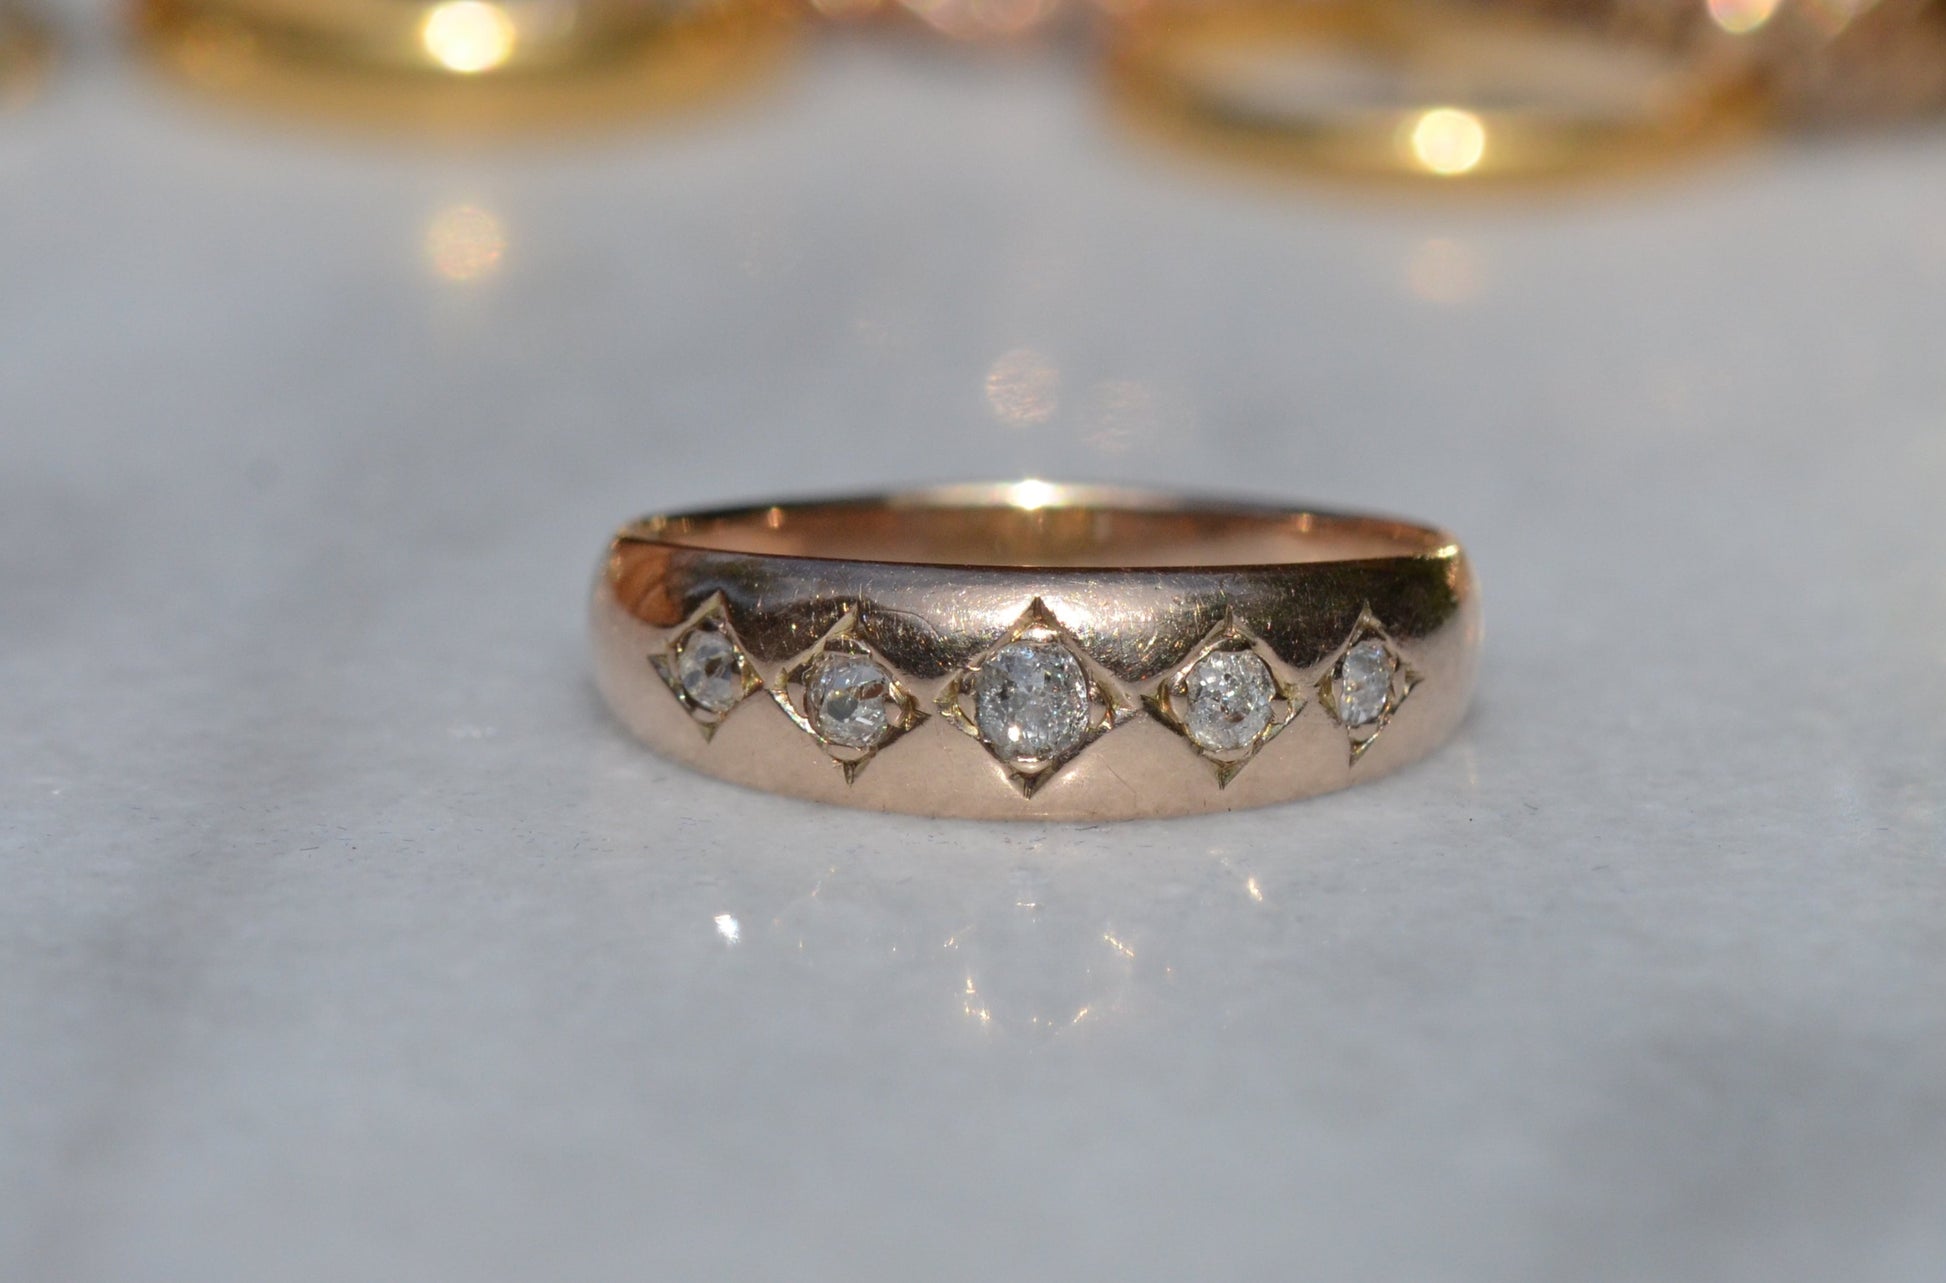 A tightly-cropped macro shot of the Victorian ring, showing the hand-cut diamond-shaped frames that hold each cushion-shaped stone. The old mine cut diamonds have internal fractures and inclusions but still sparkle in the direct sun, and the gold is weathered from a century of wear. The ring is facing head-on.